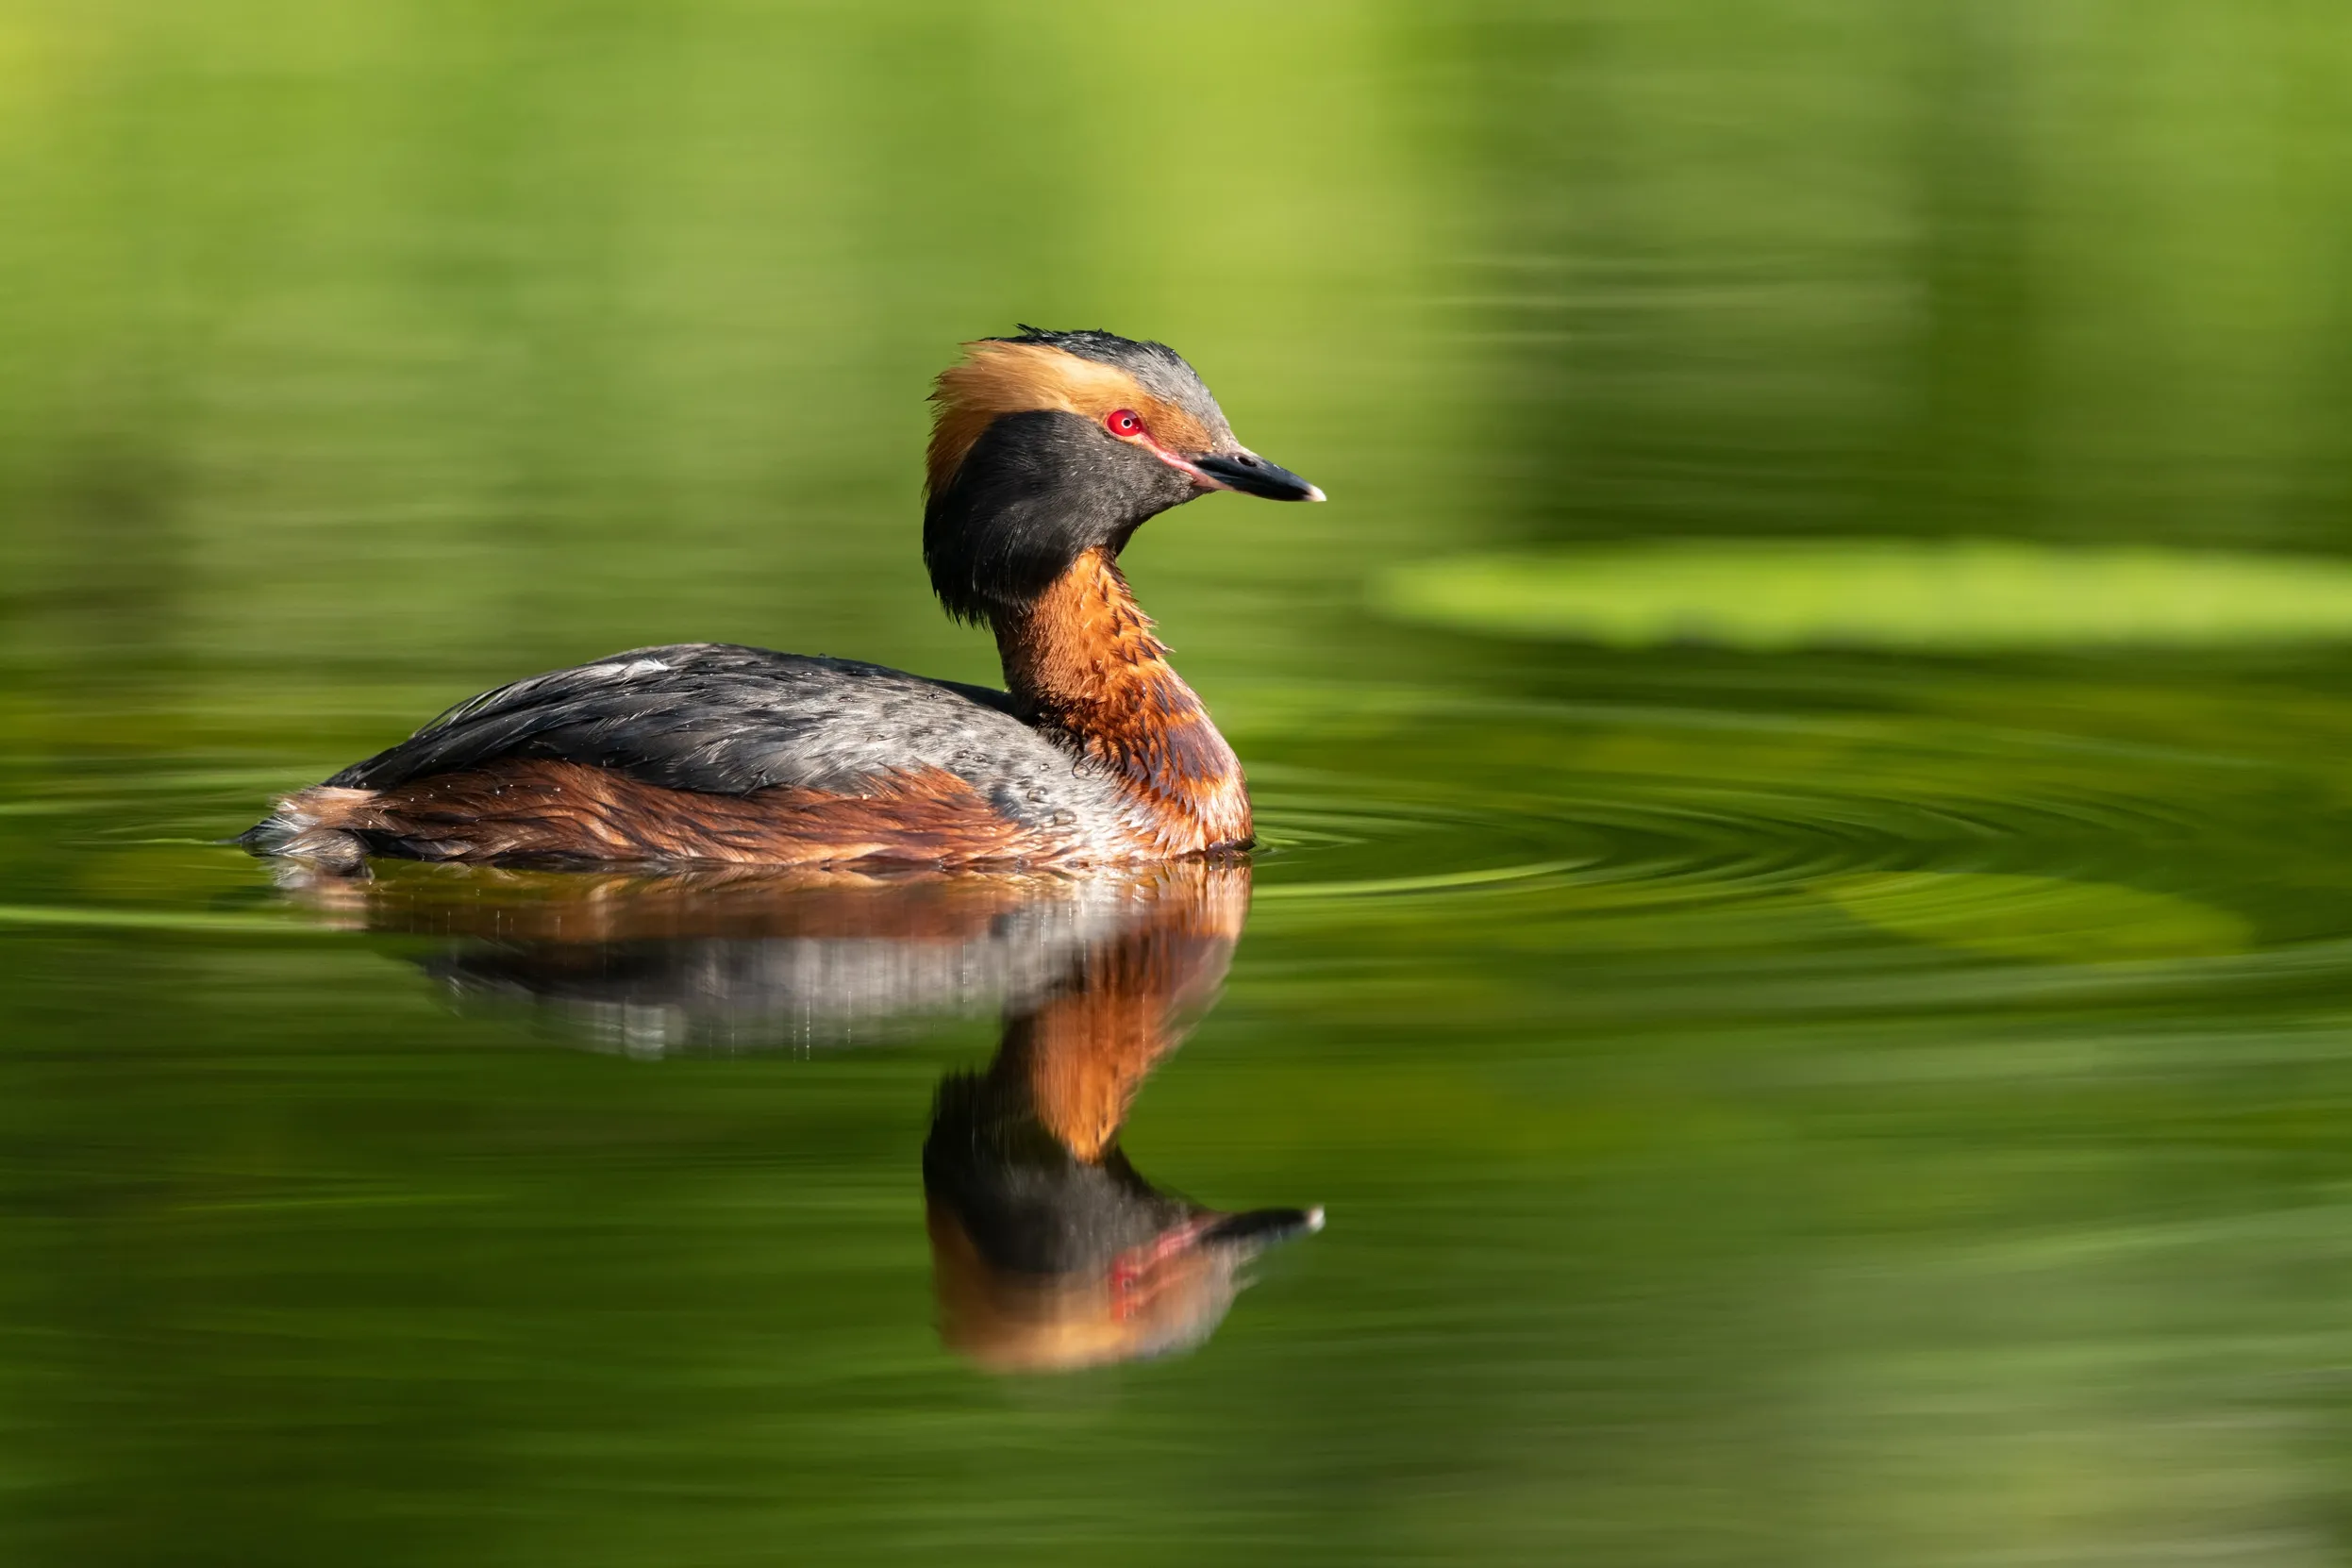 Grebe with striking orange, grey and black plumage, floating on still water which reflects the greenery of the tree canopy above.